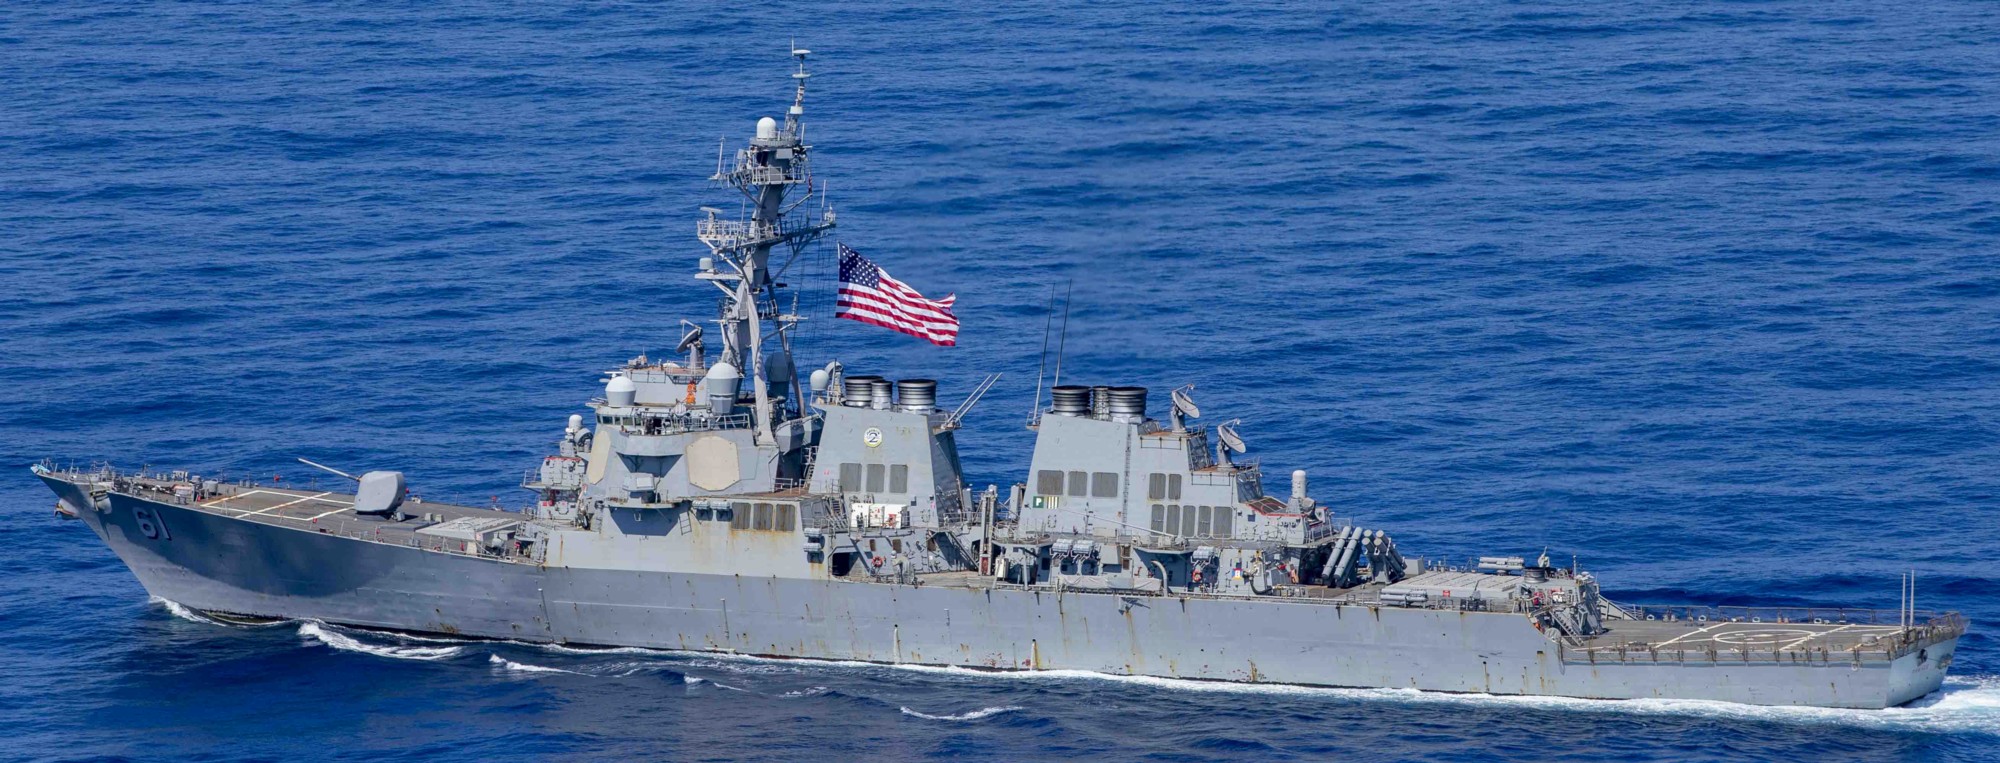 ddg-61 uss ramage guided missile destroyer arleigh burke class aegis us navy ionian sea 118